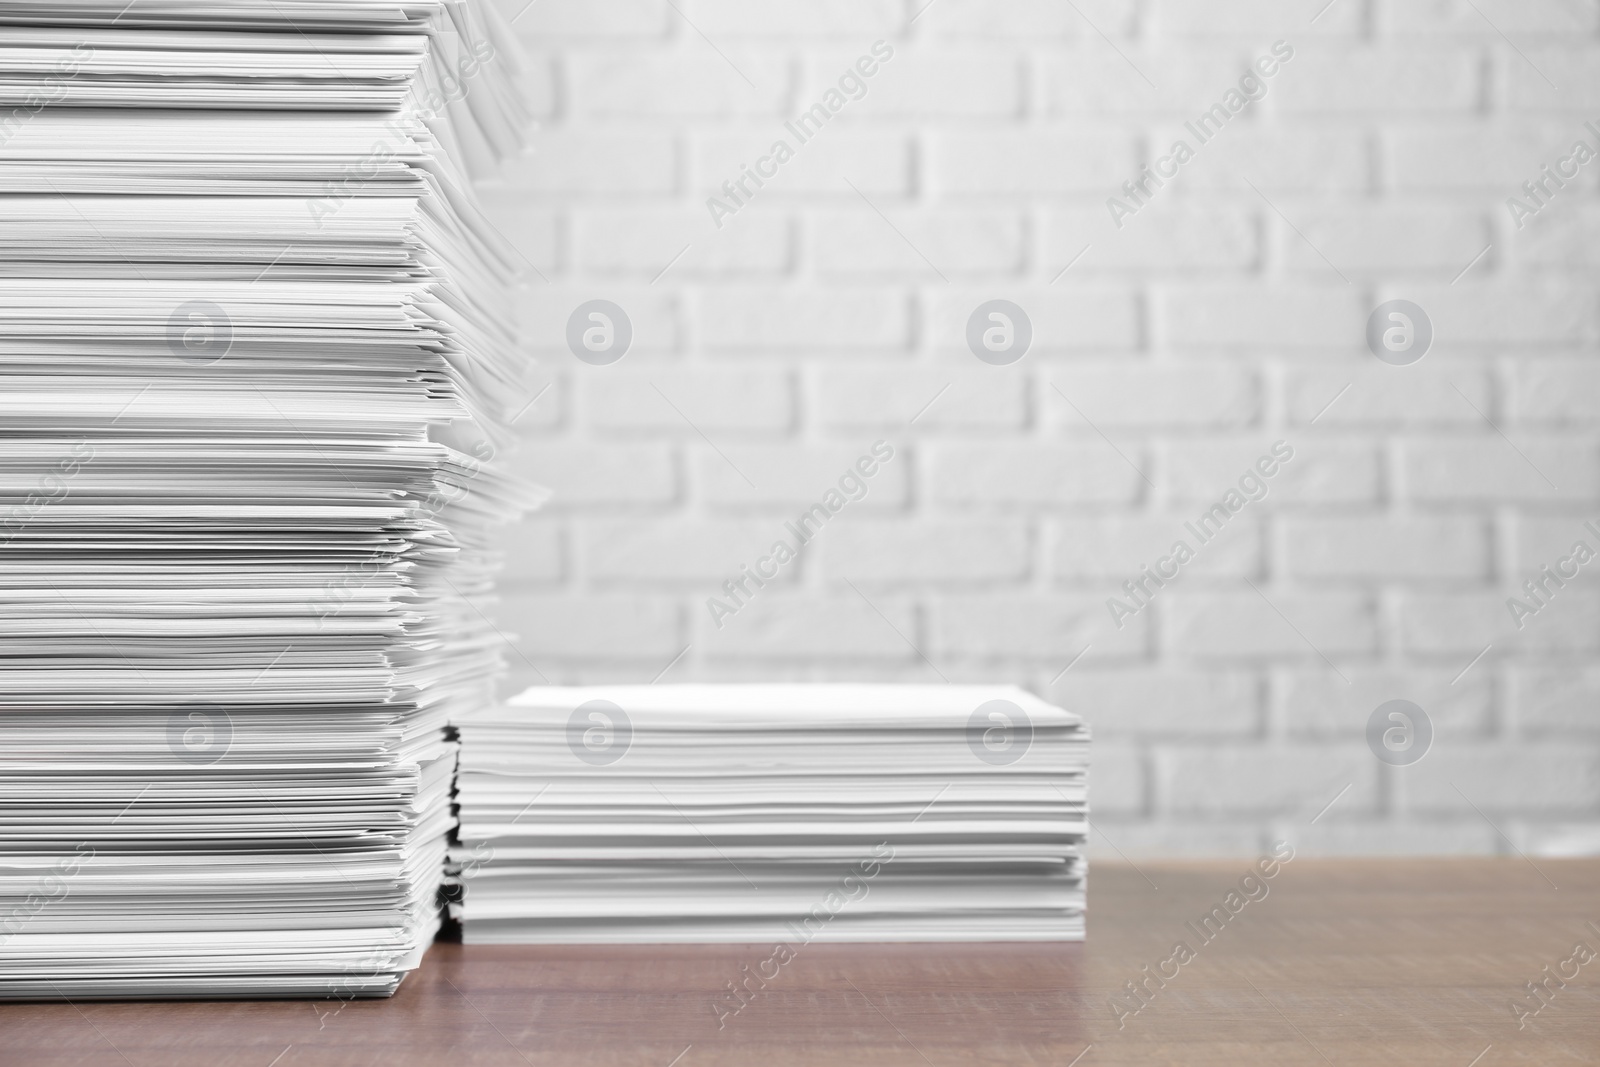 Photo of Stacks of paper sheets on wooden table near white brick wall, space for text